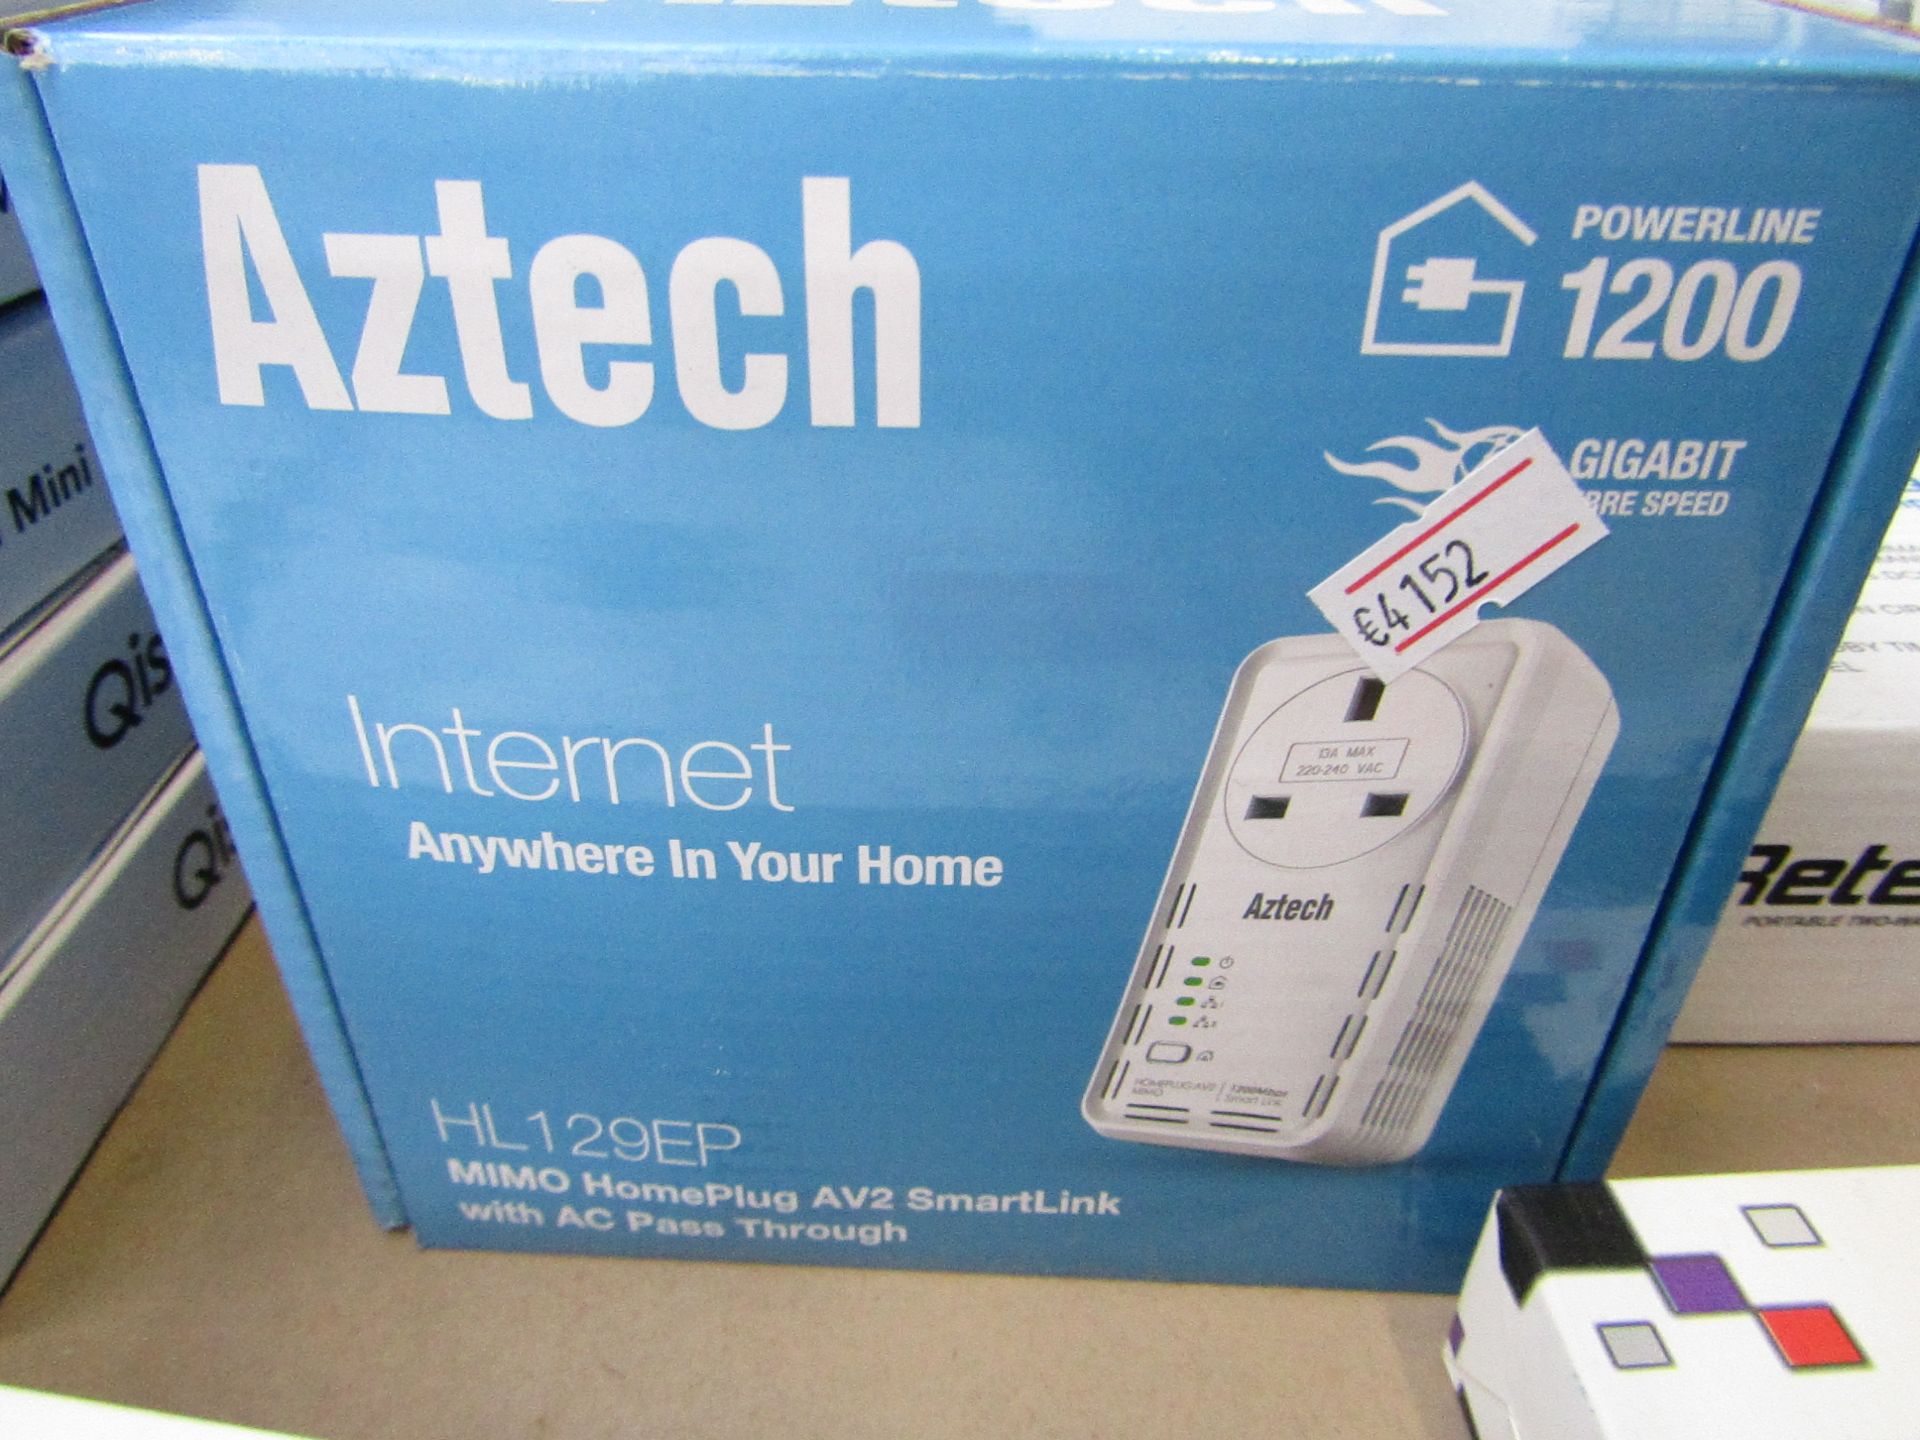 Aztech - HL129EP - MIMO Homeplug AV2 Smartlink with AC paa through, unchecked and boxed.